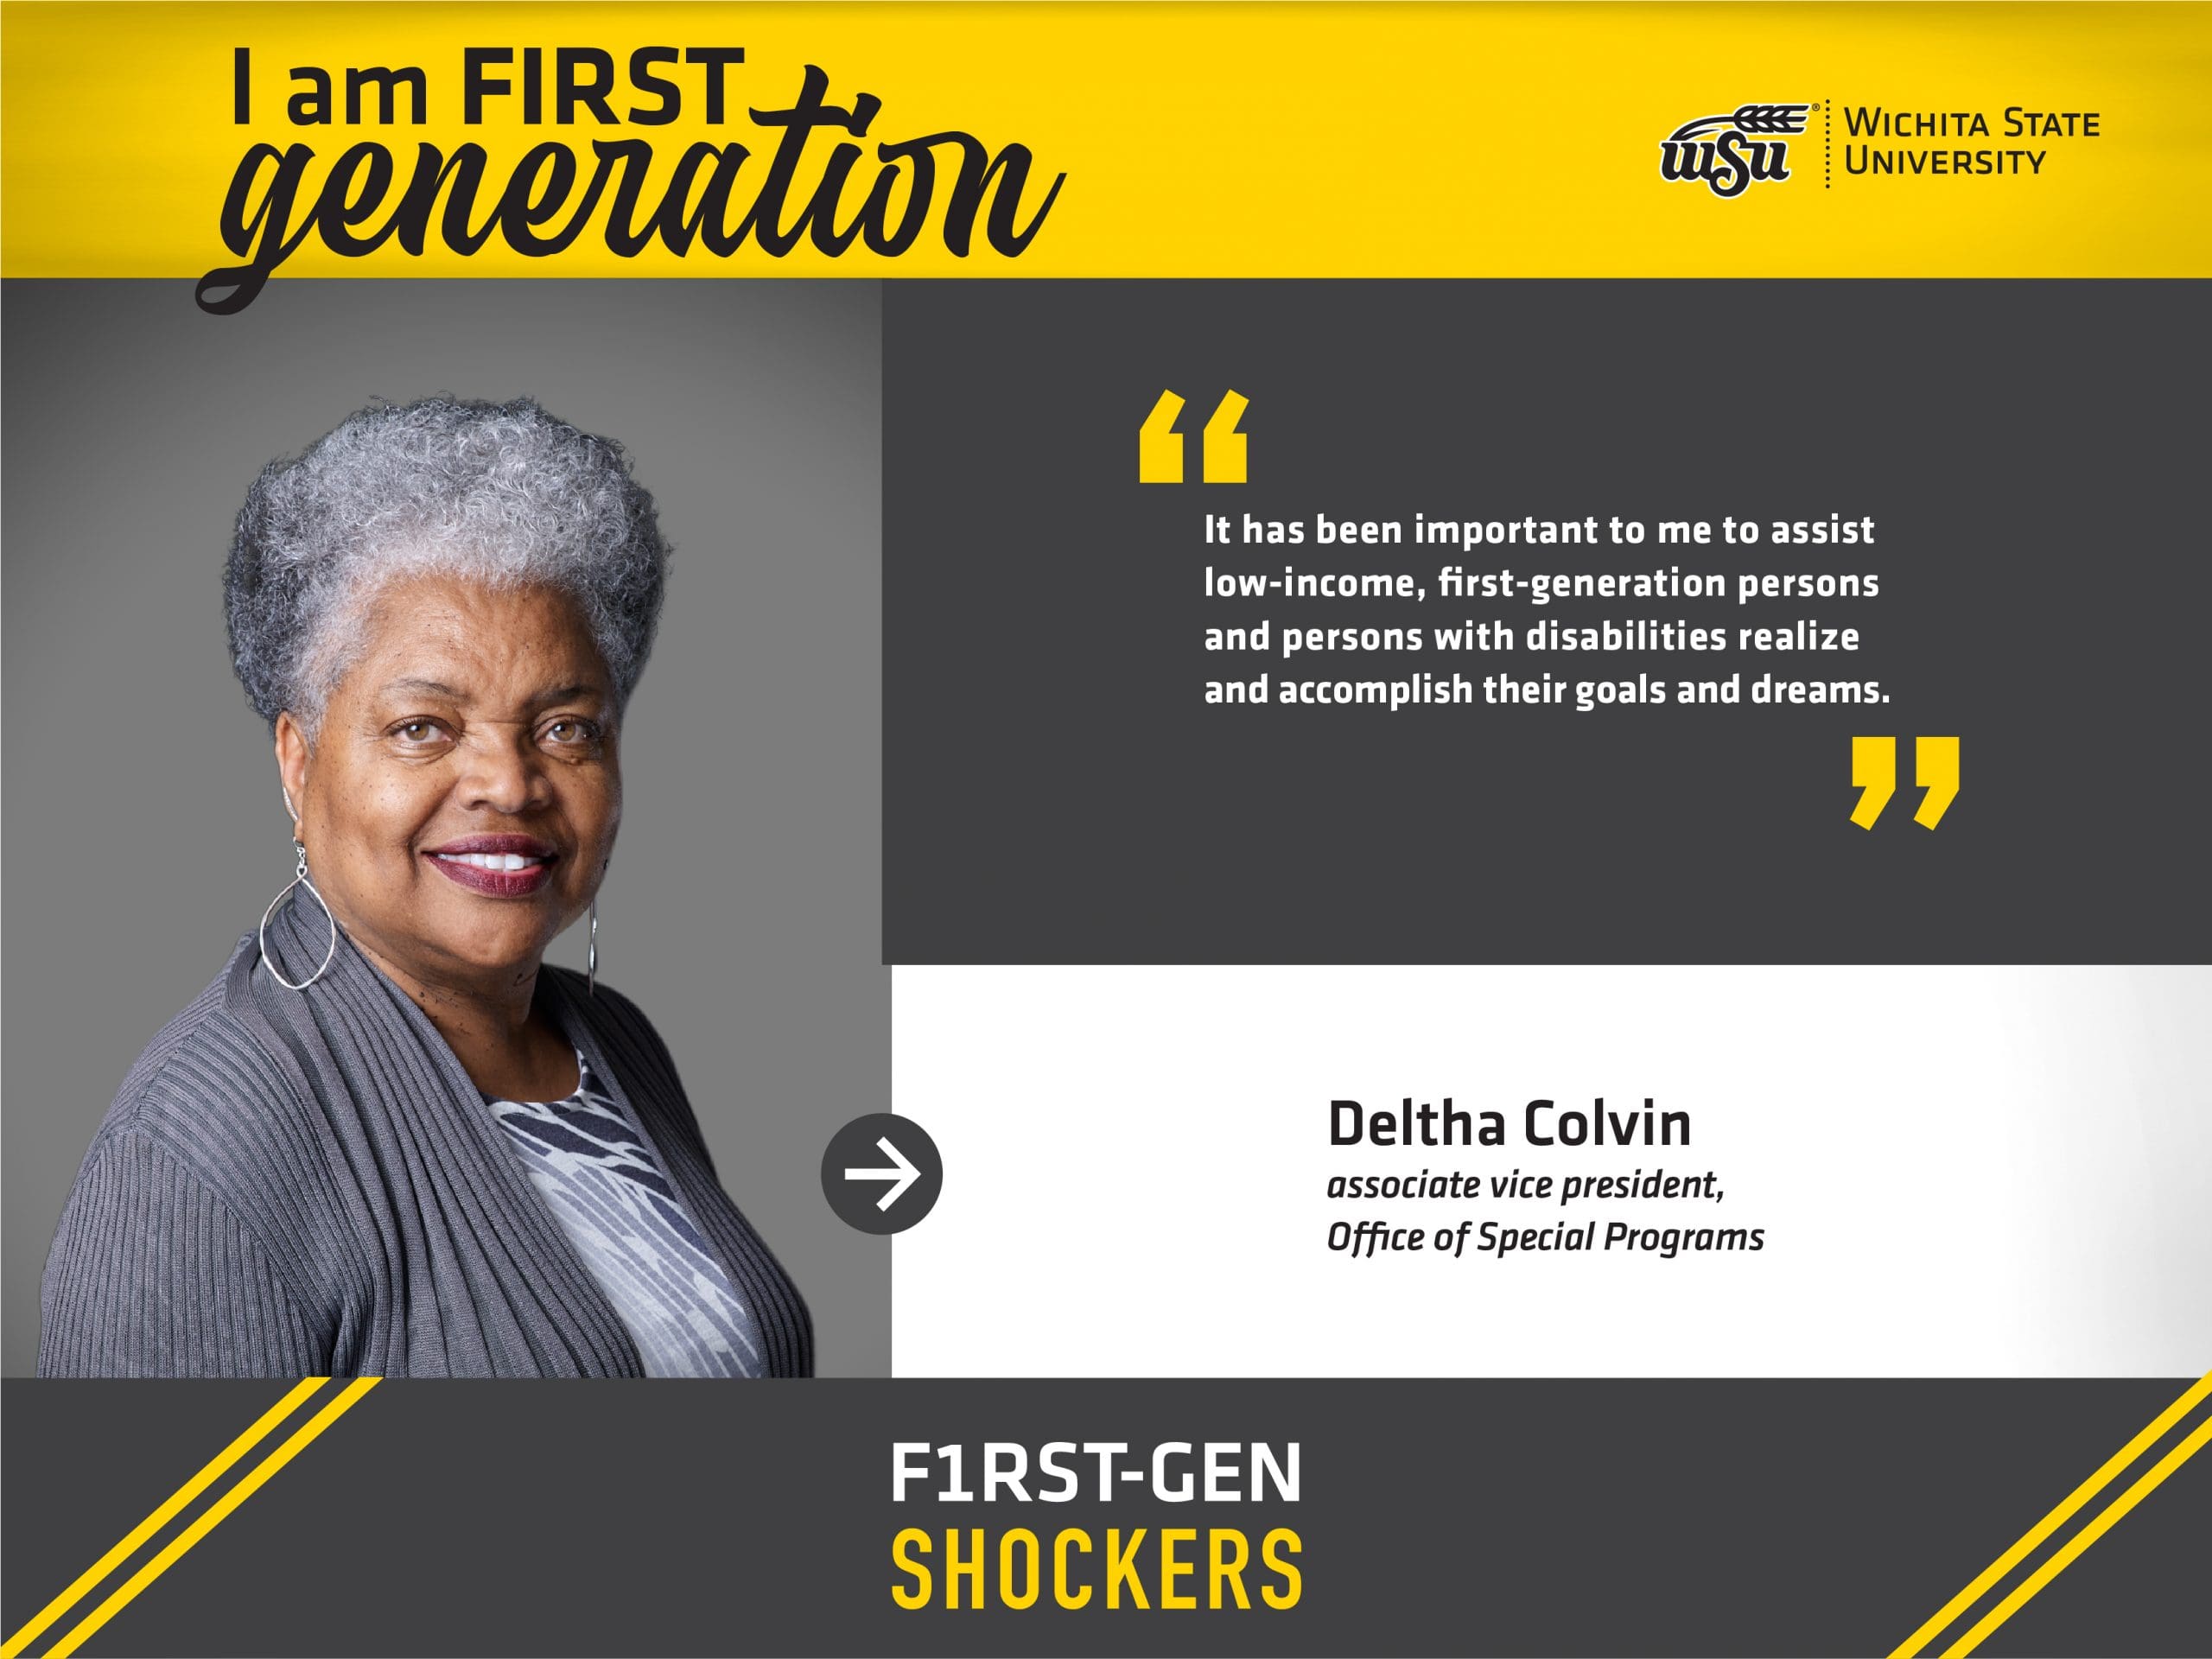 Image Alt Text I am FIRST generation. Wichita State University. “It has been important to me to assist low-income, first-generation persons and persons with disabilities realize and accomplish their goals and dreams.” Deltha Colvin. Associate vice president, Office of Special Programs. F1RST-GEN SHOCKERS.